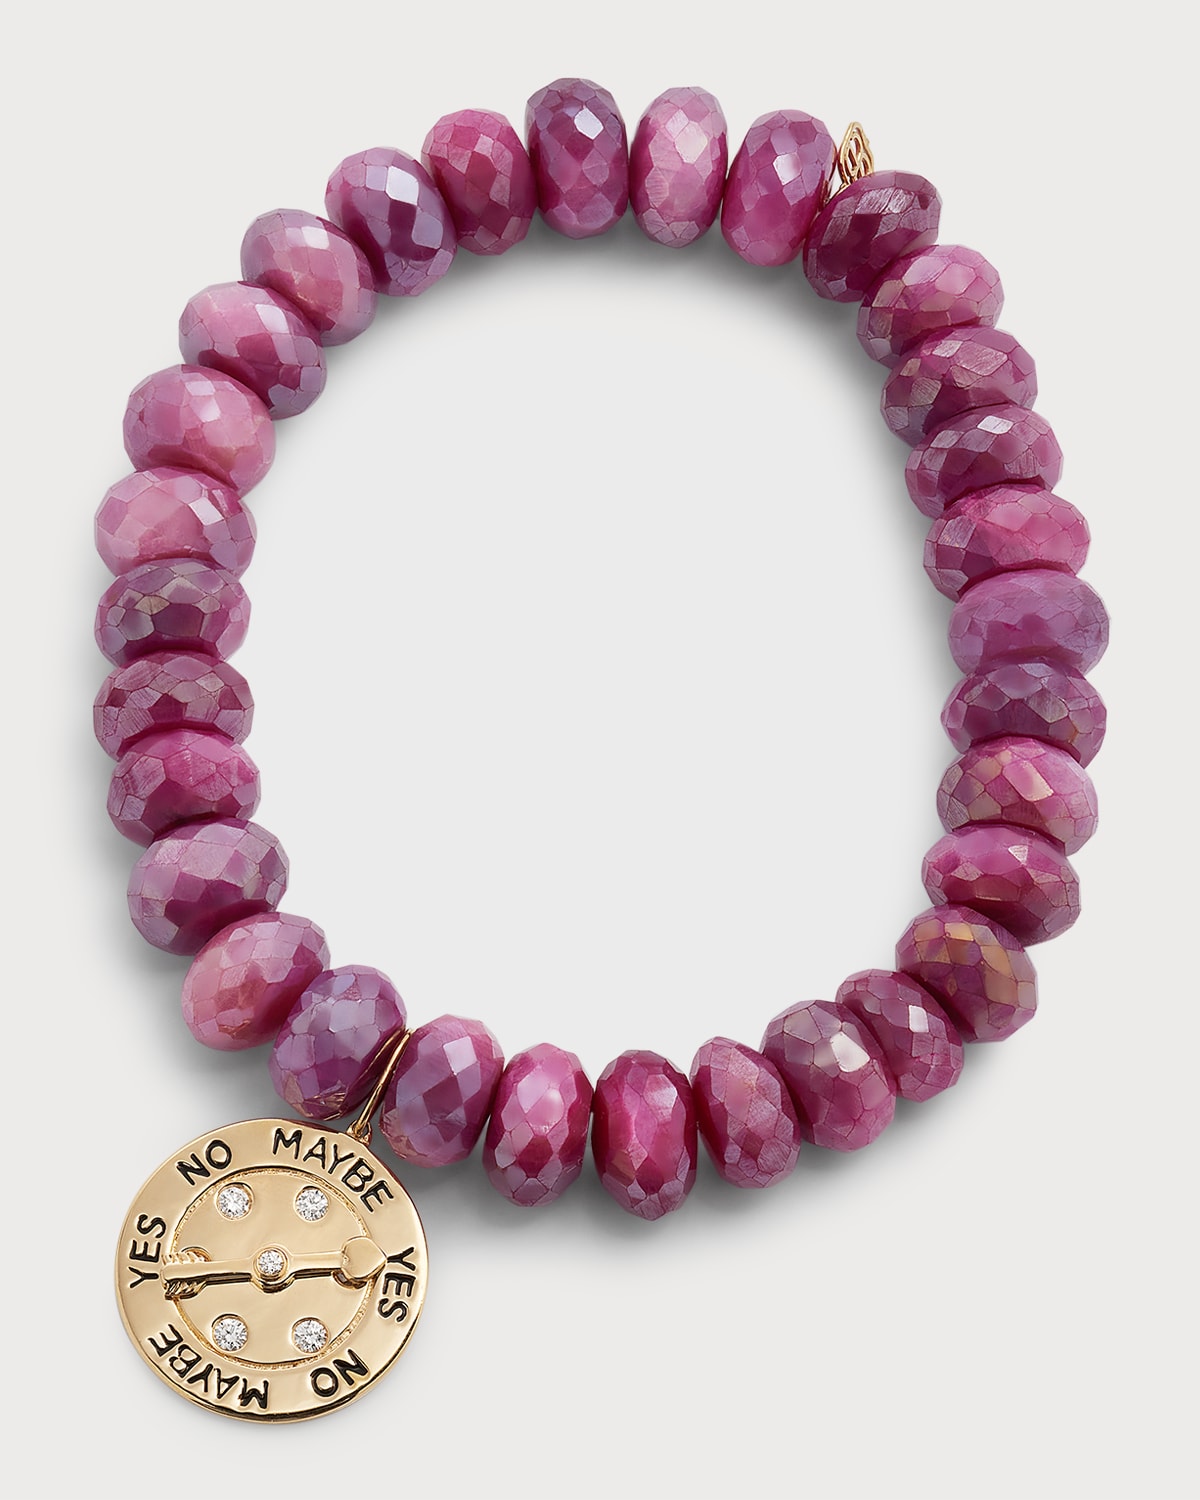 10mm Faceted Mystic Red Moonstone Rondelle Bracelet with Diamond Love Meter Charm